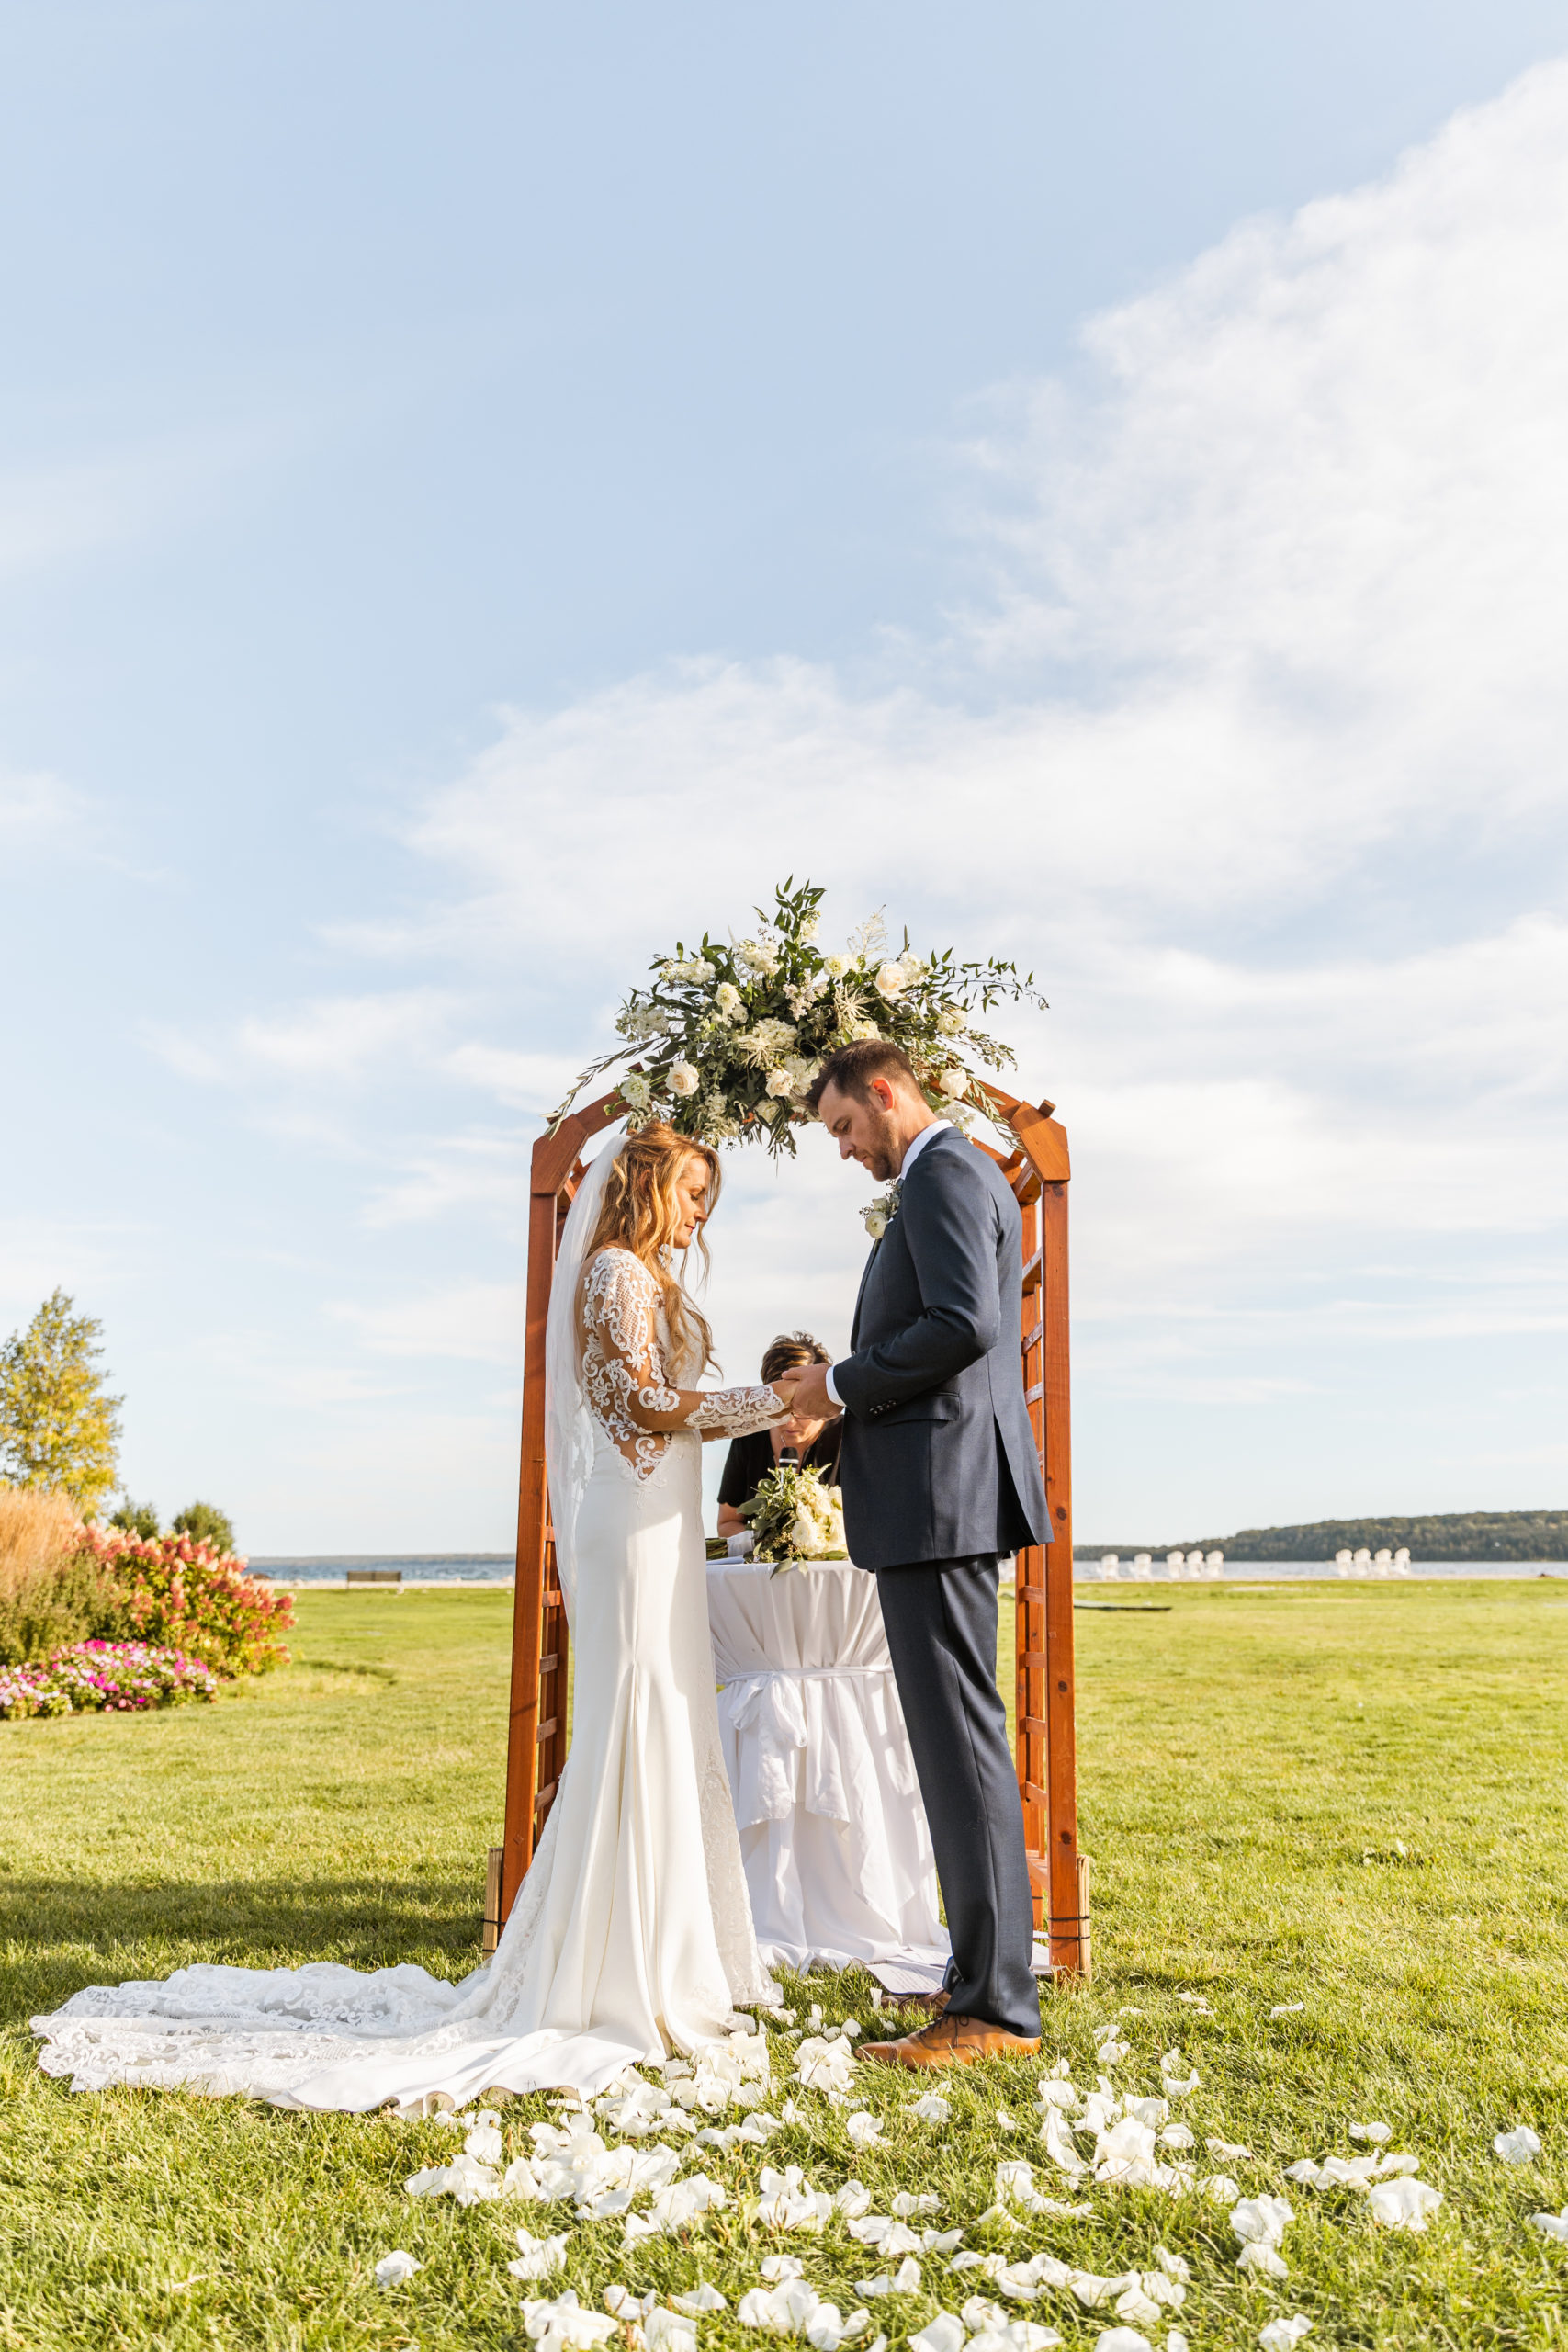 Mackinac Island wedding ceremony on lawn in front of Lake Michigan